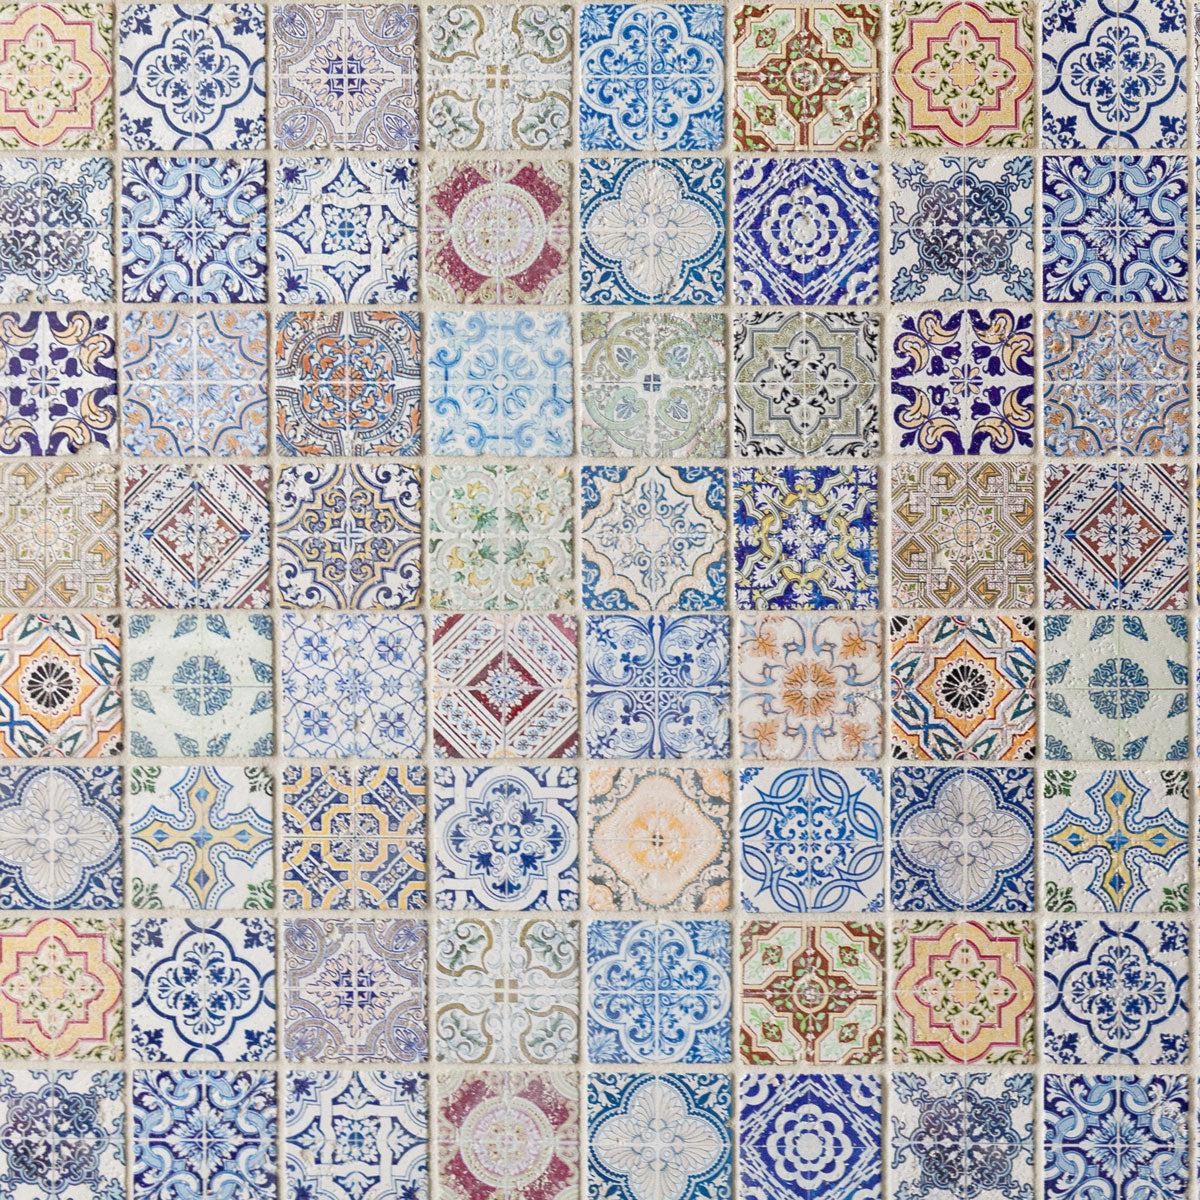 Colorful Moroccan Tile on Mosaic Backing